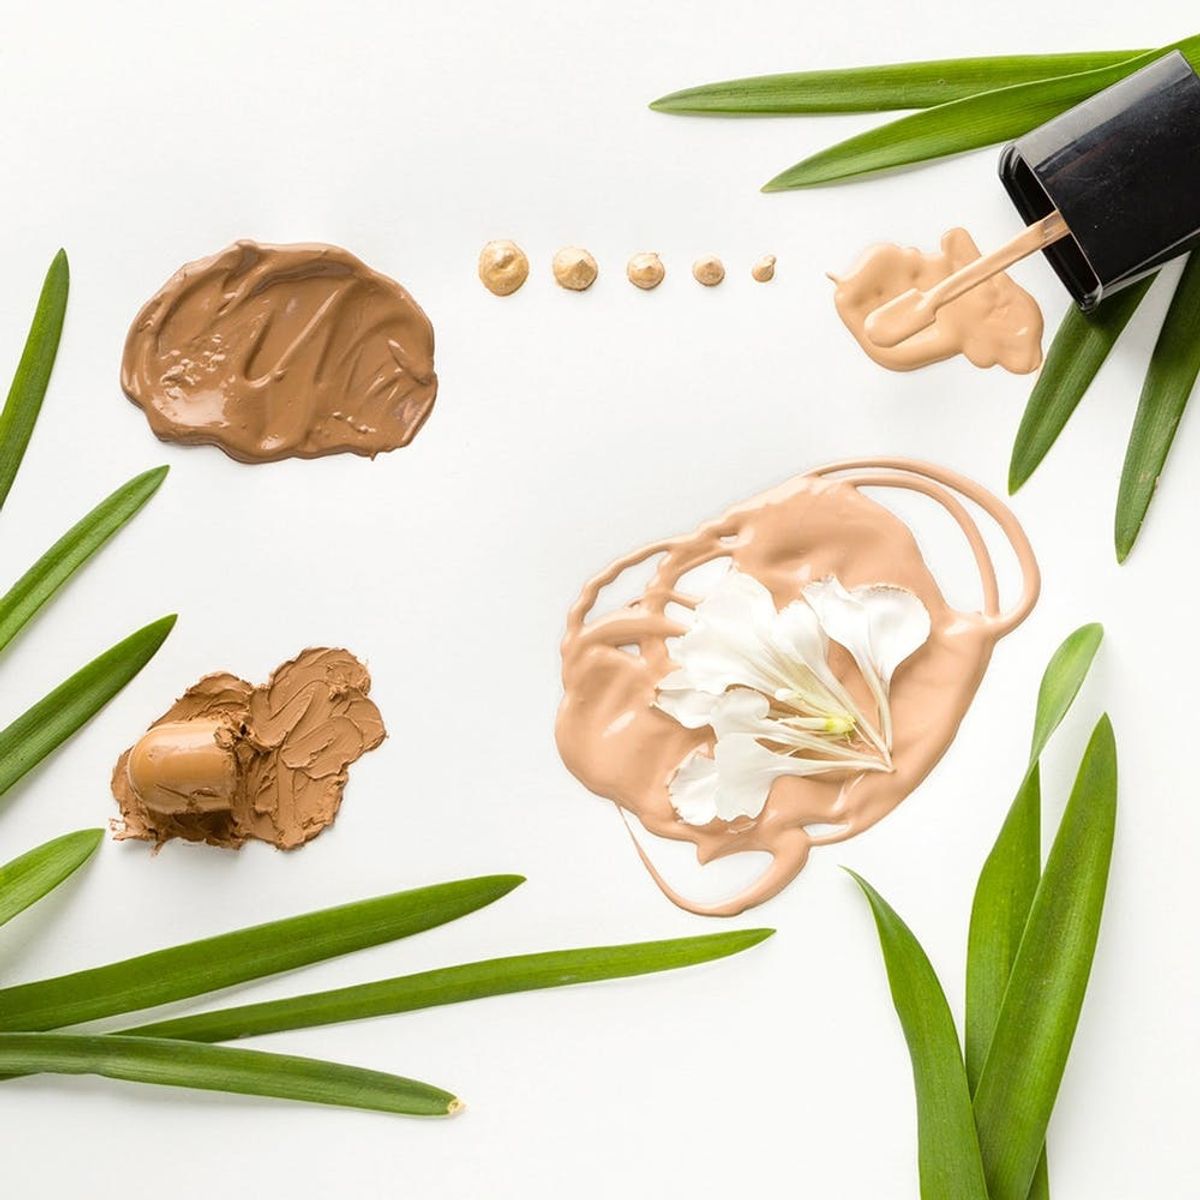 The Most Trusted Sources for Green Beauty Education